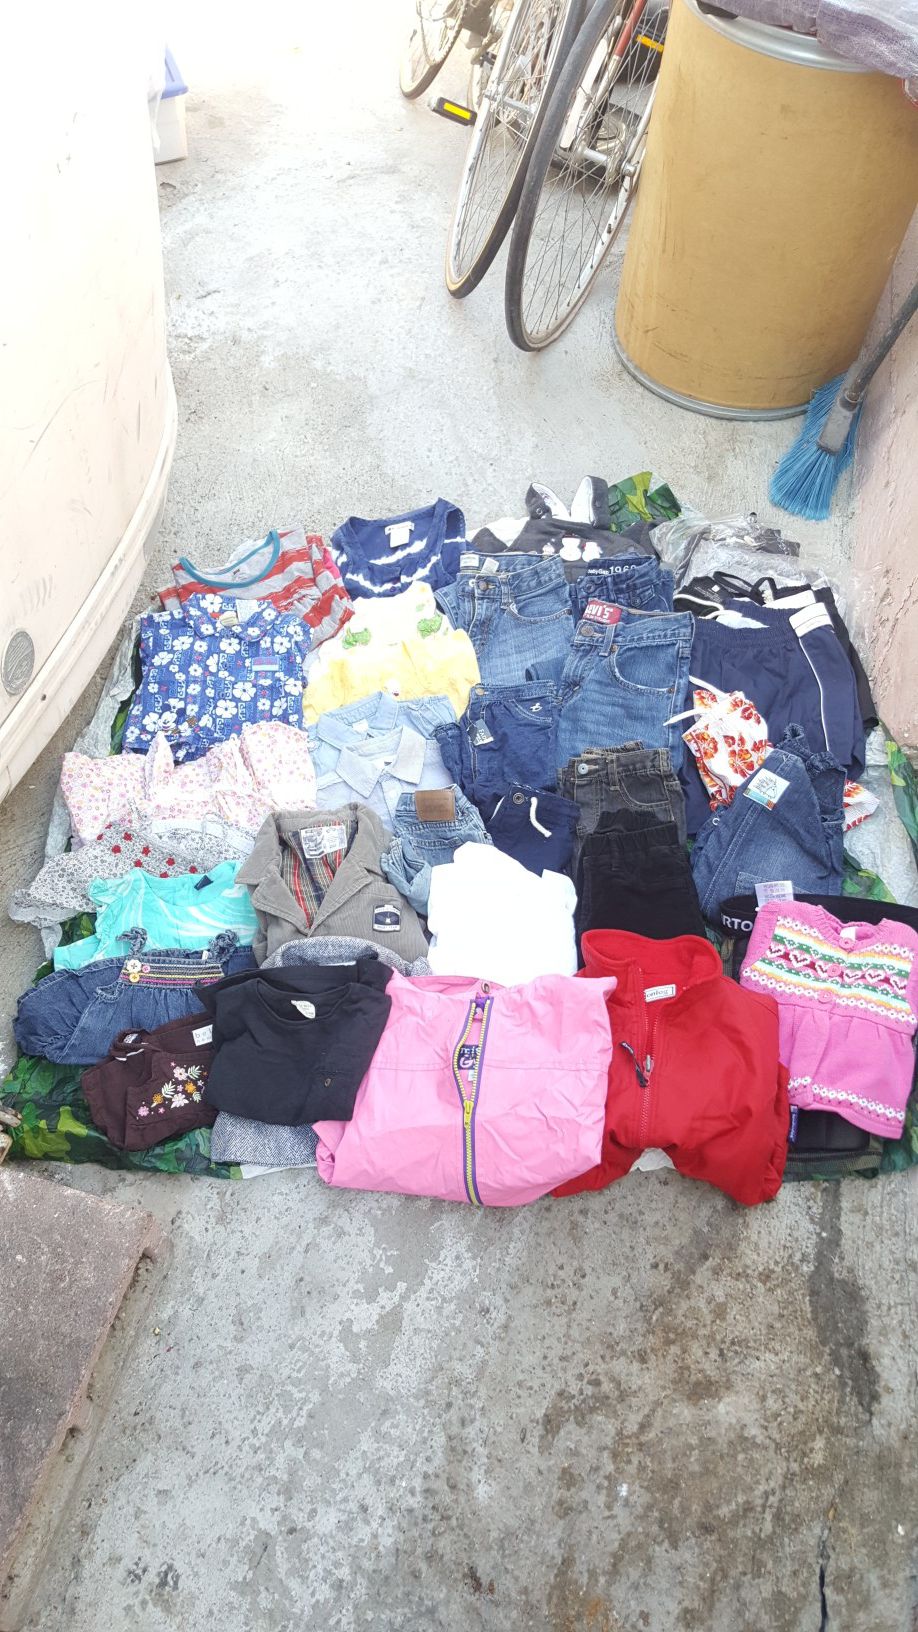 37 pcs of Kids and girls clothing mostly used but some pcs are brand new